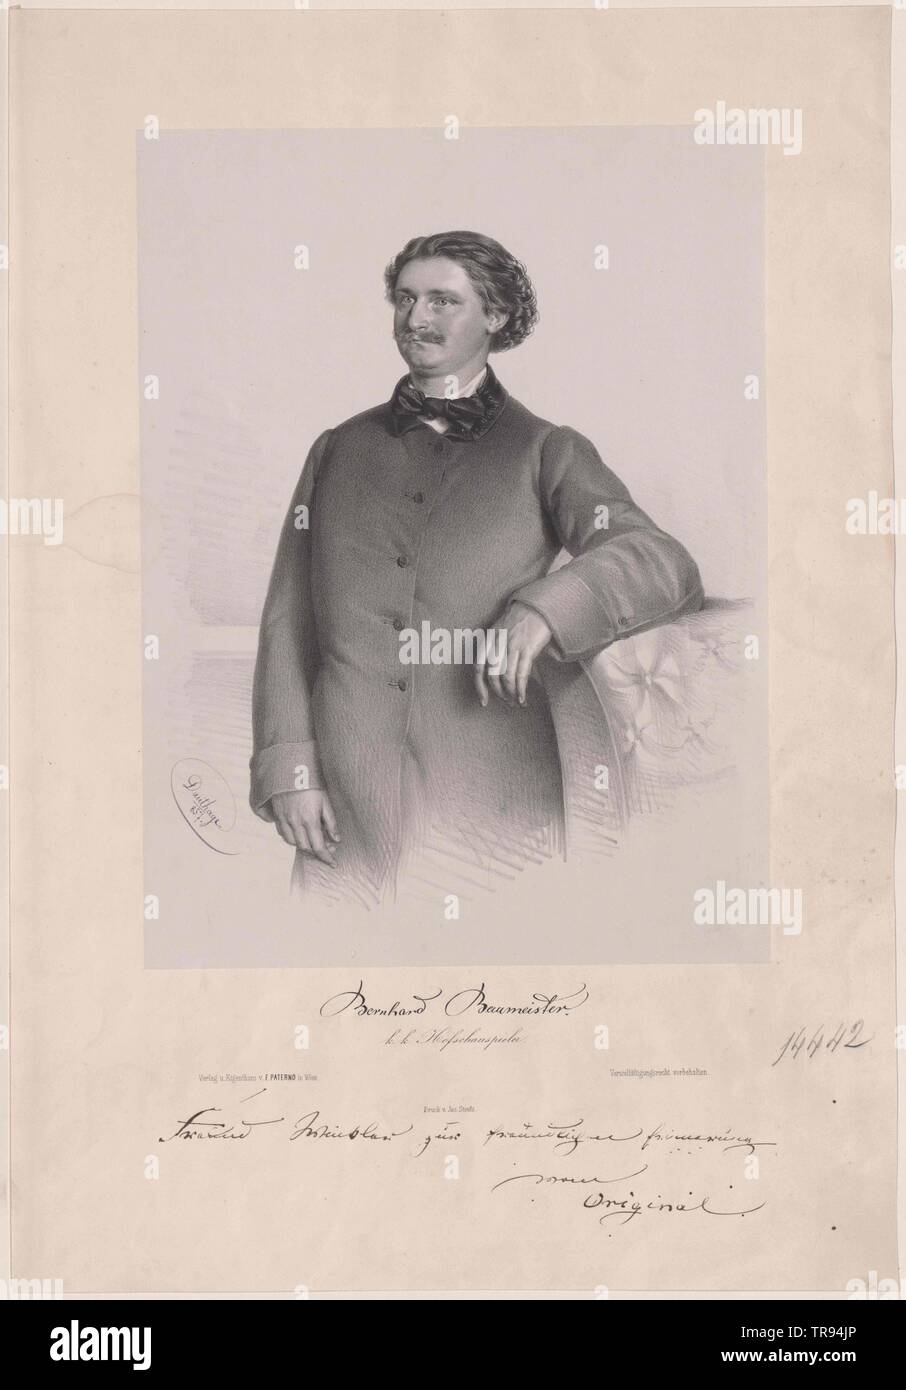 Baumeister, Bernard, actor (since 1852 at Burgtheater (Austrian National Theatre)), , Additional-Rights-Clearance-Info-Not-Available Stock Photo